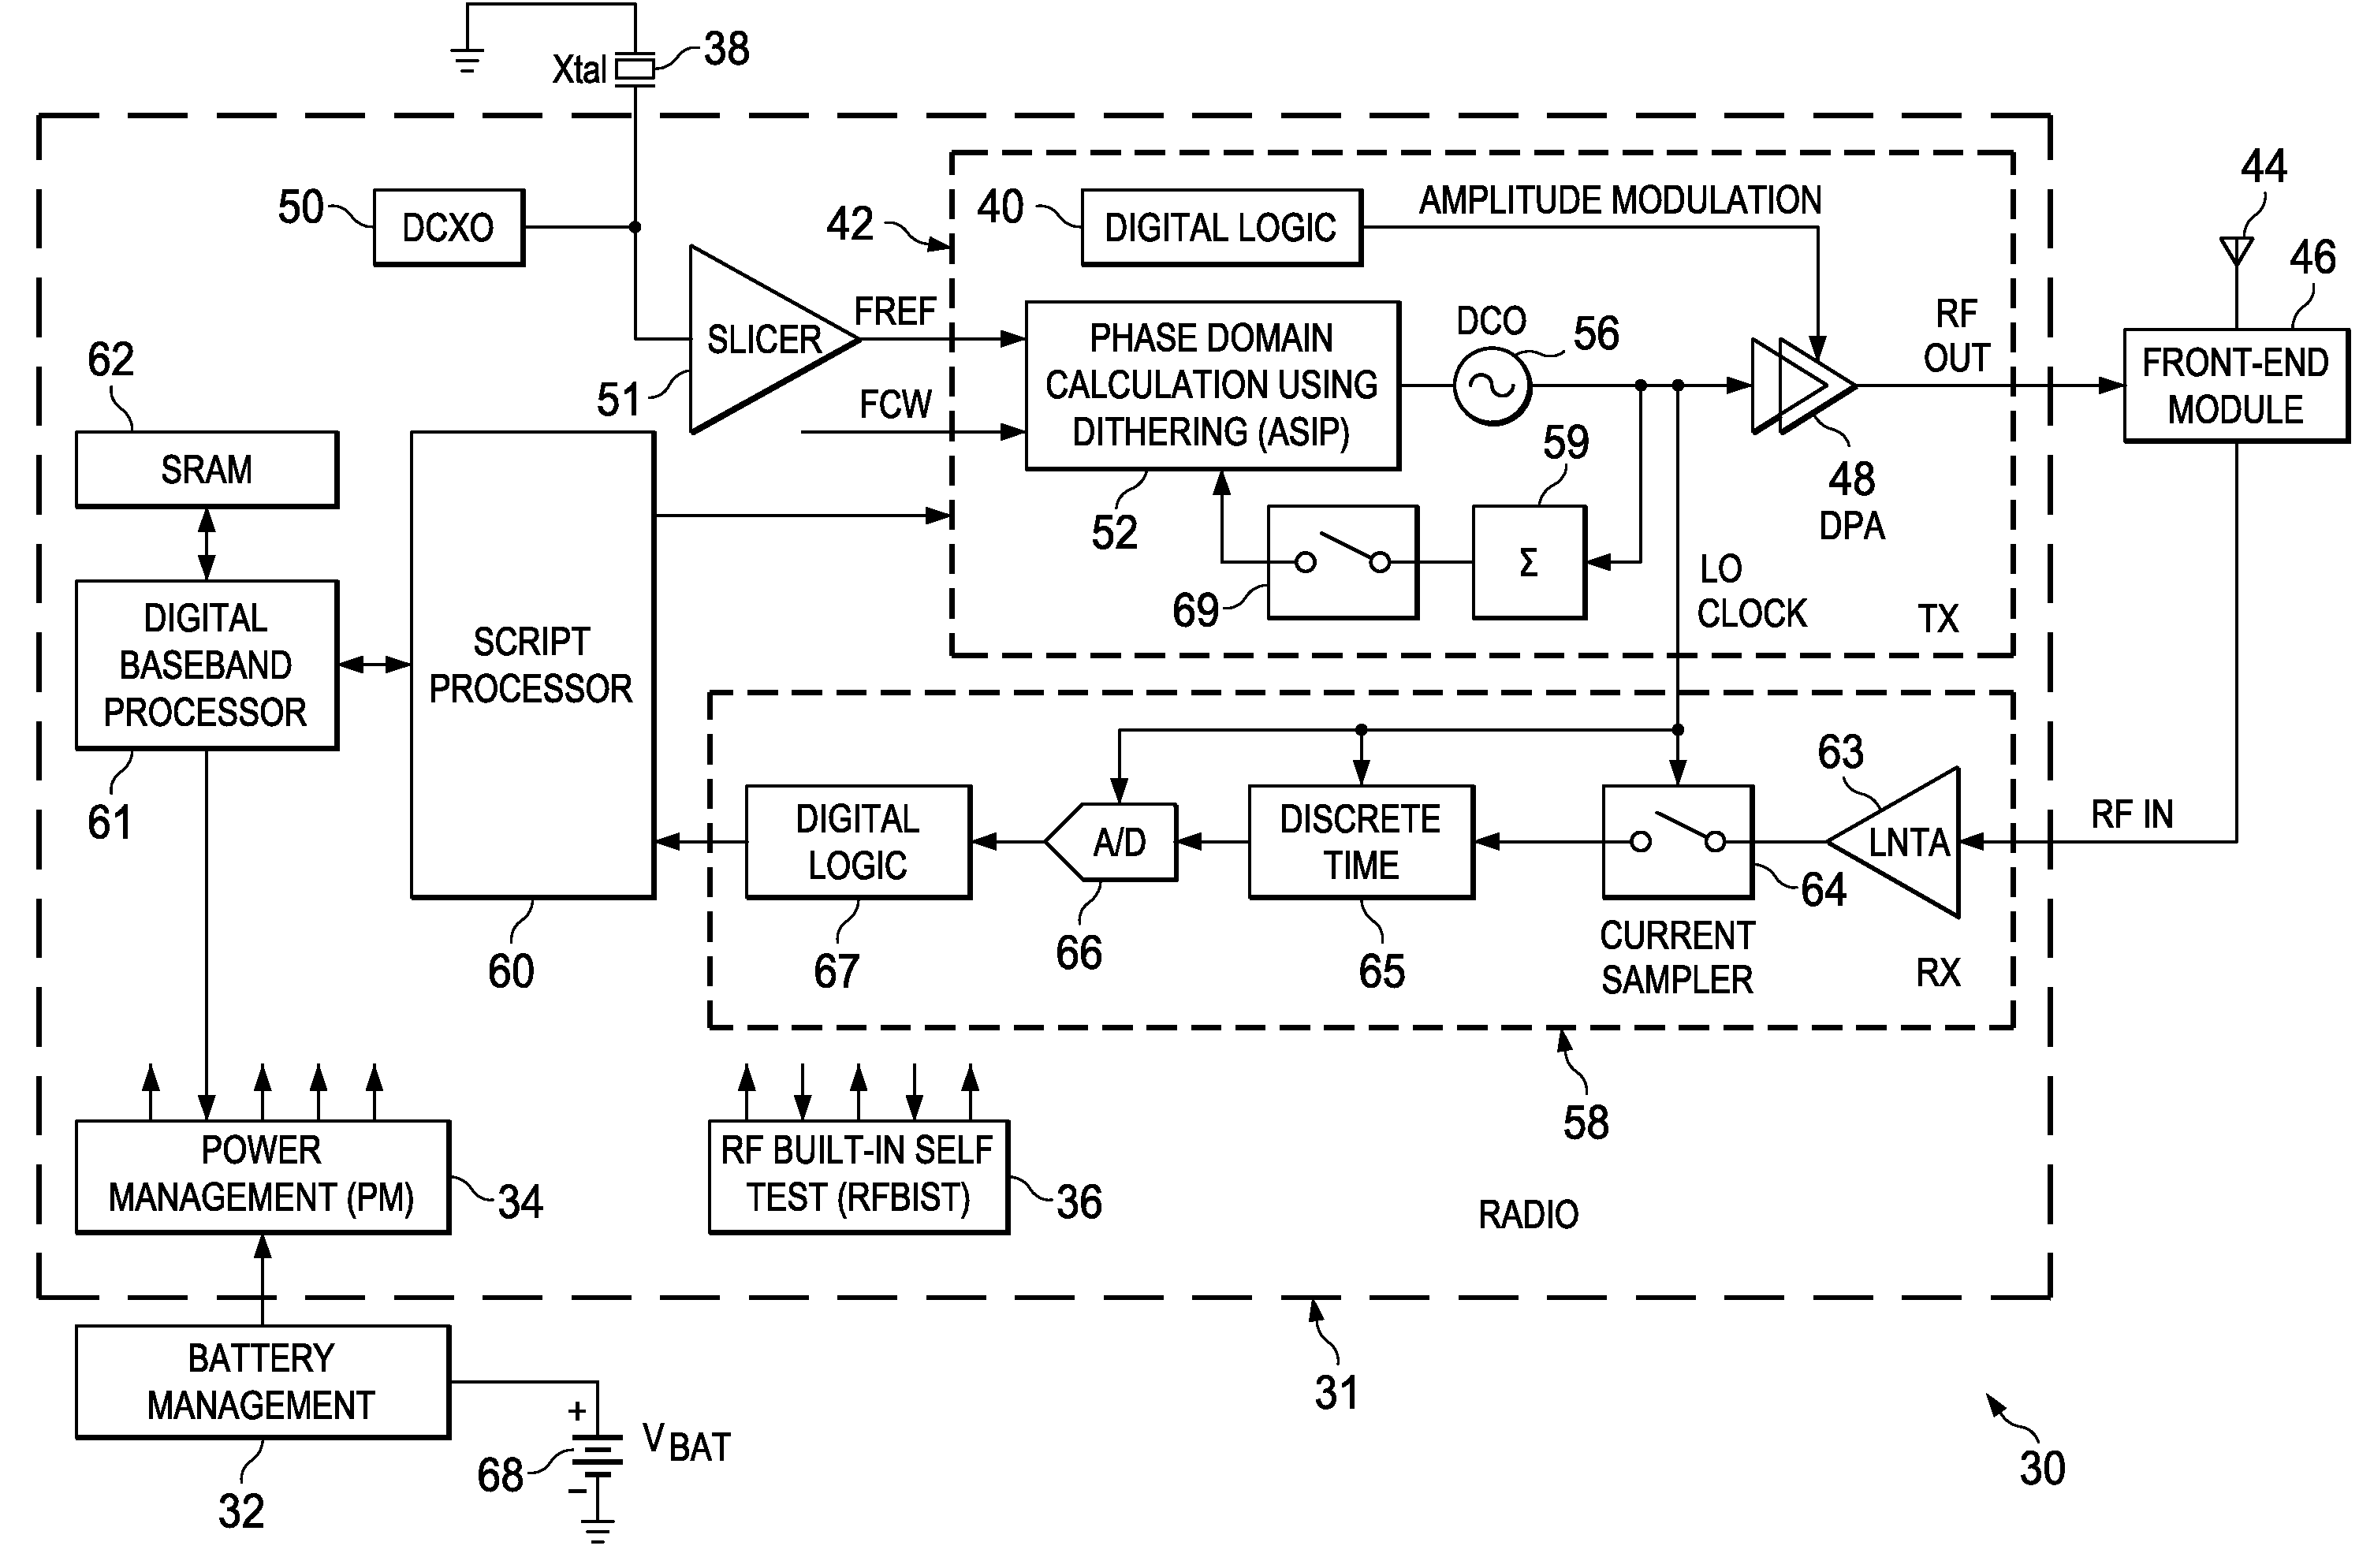 Computation spreading utilizing dithering for spur reduction in a digital phase lock loop